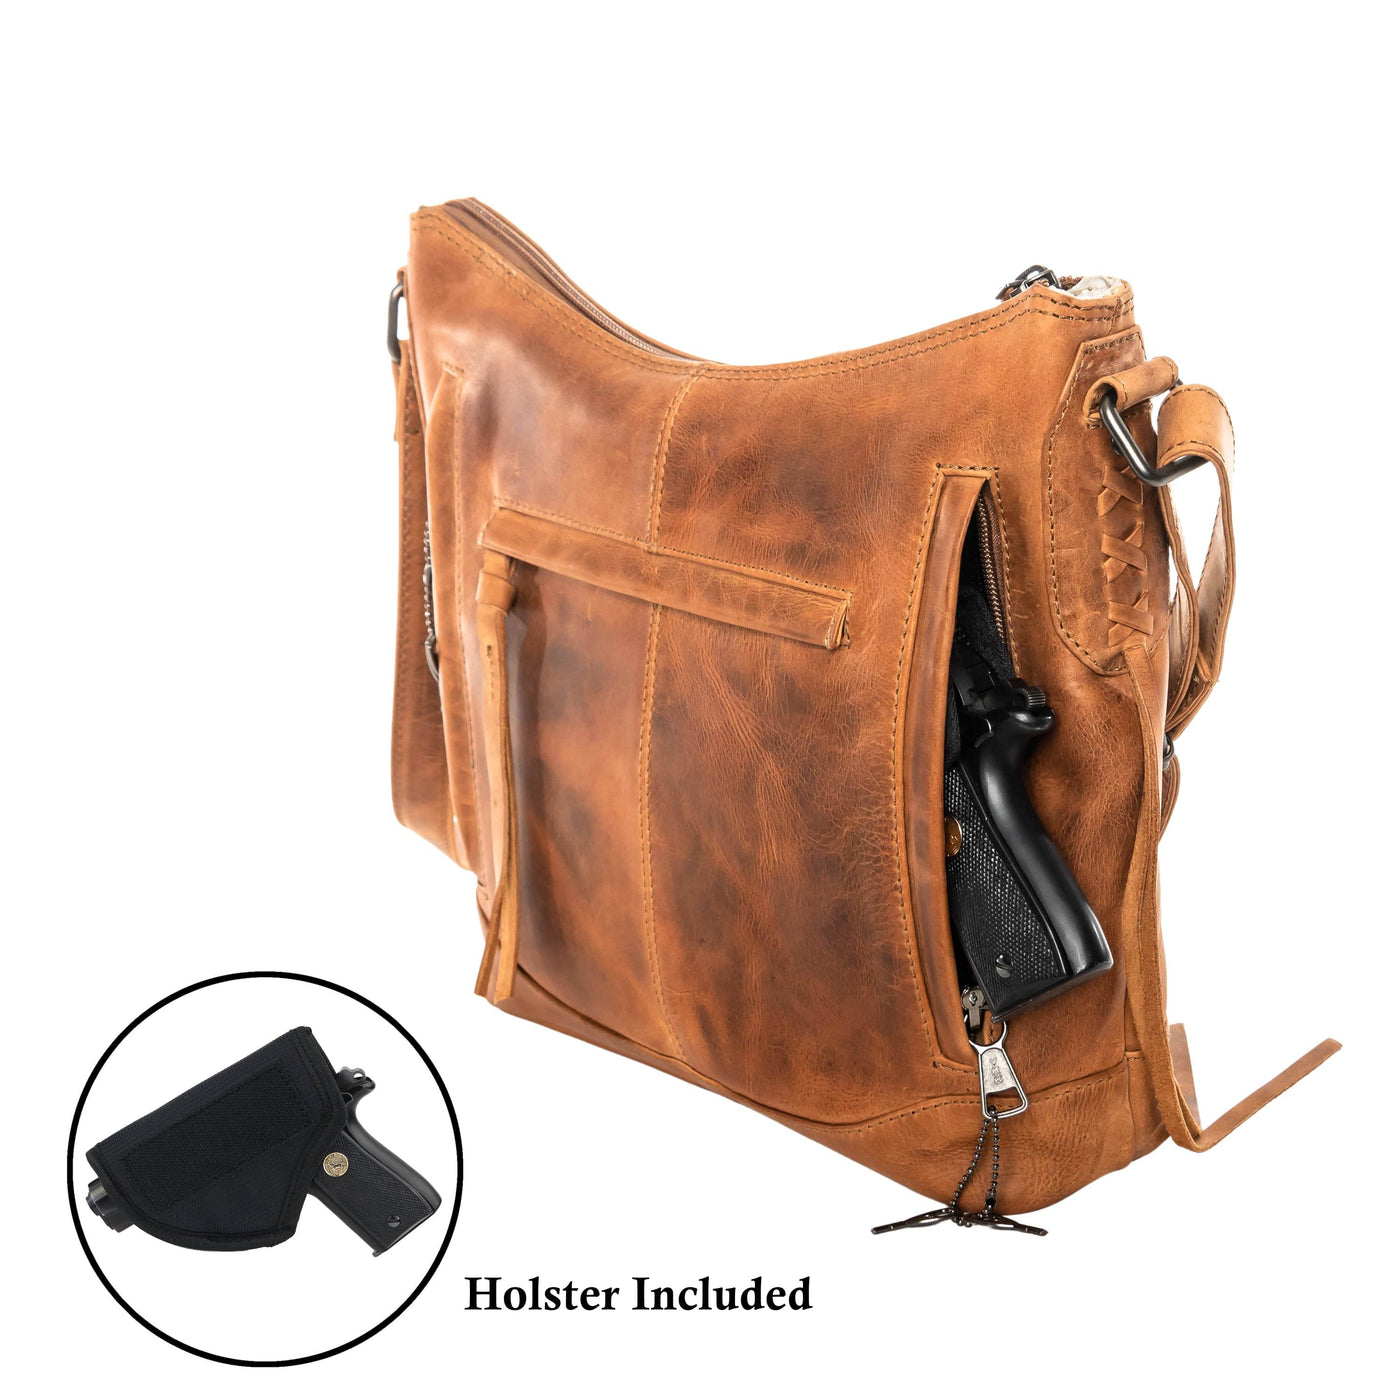 Lady Conceal Concealed Carry Purse Dark Mahogany Concealed Carry Blake Scooped Leather Crossbody Bag by Lady Conceal